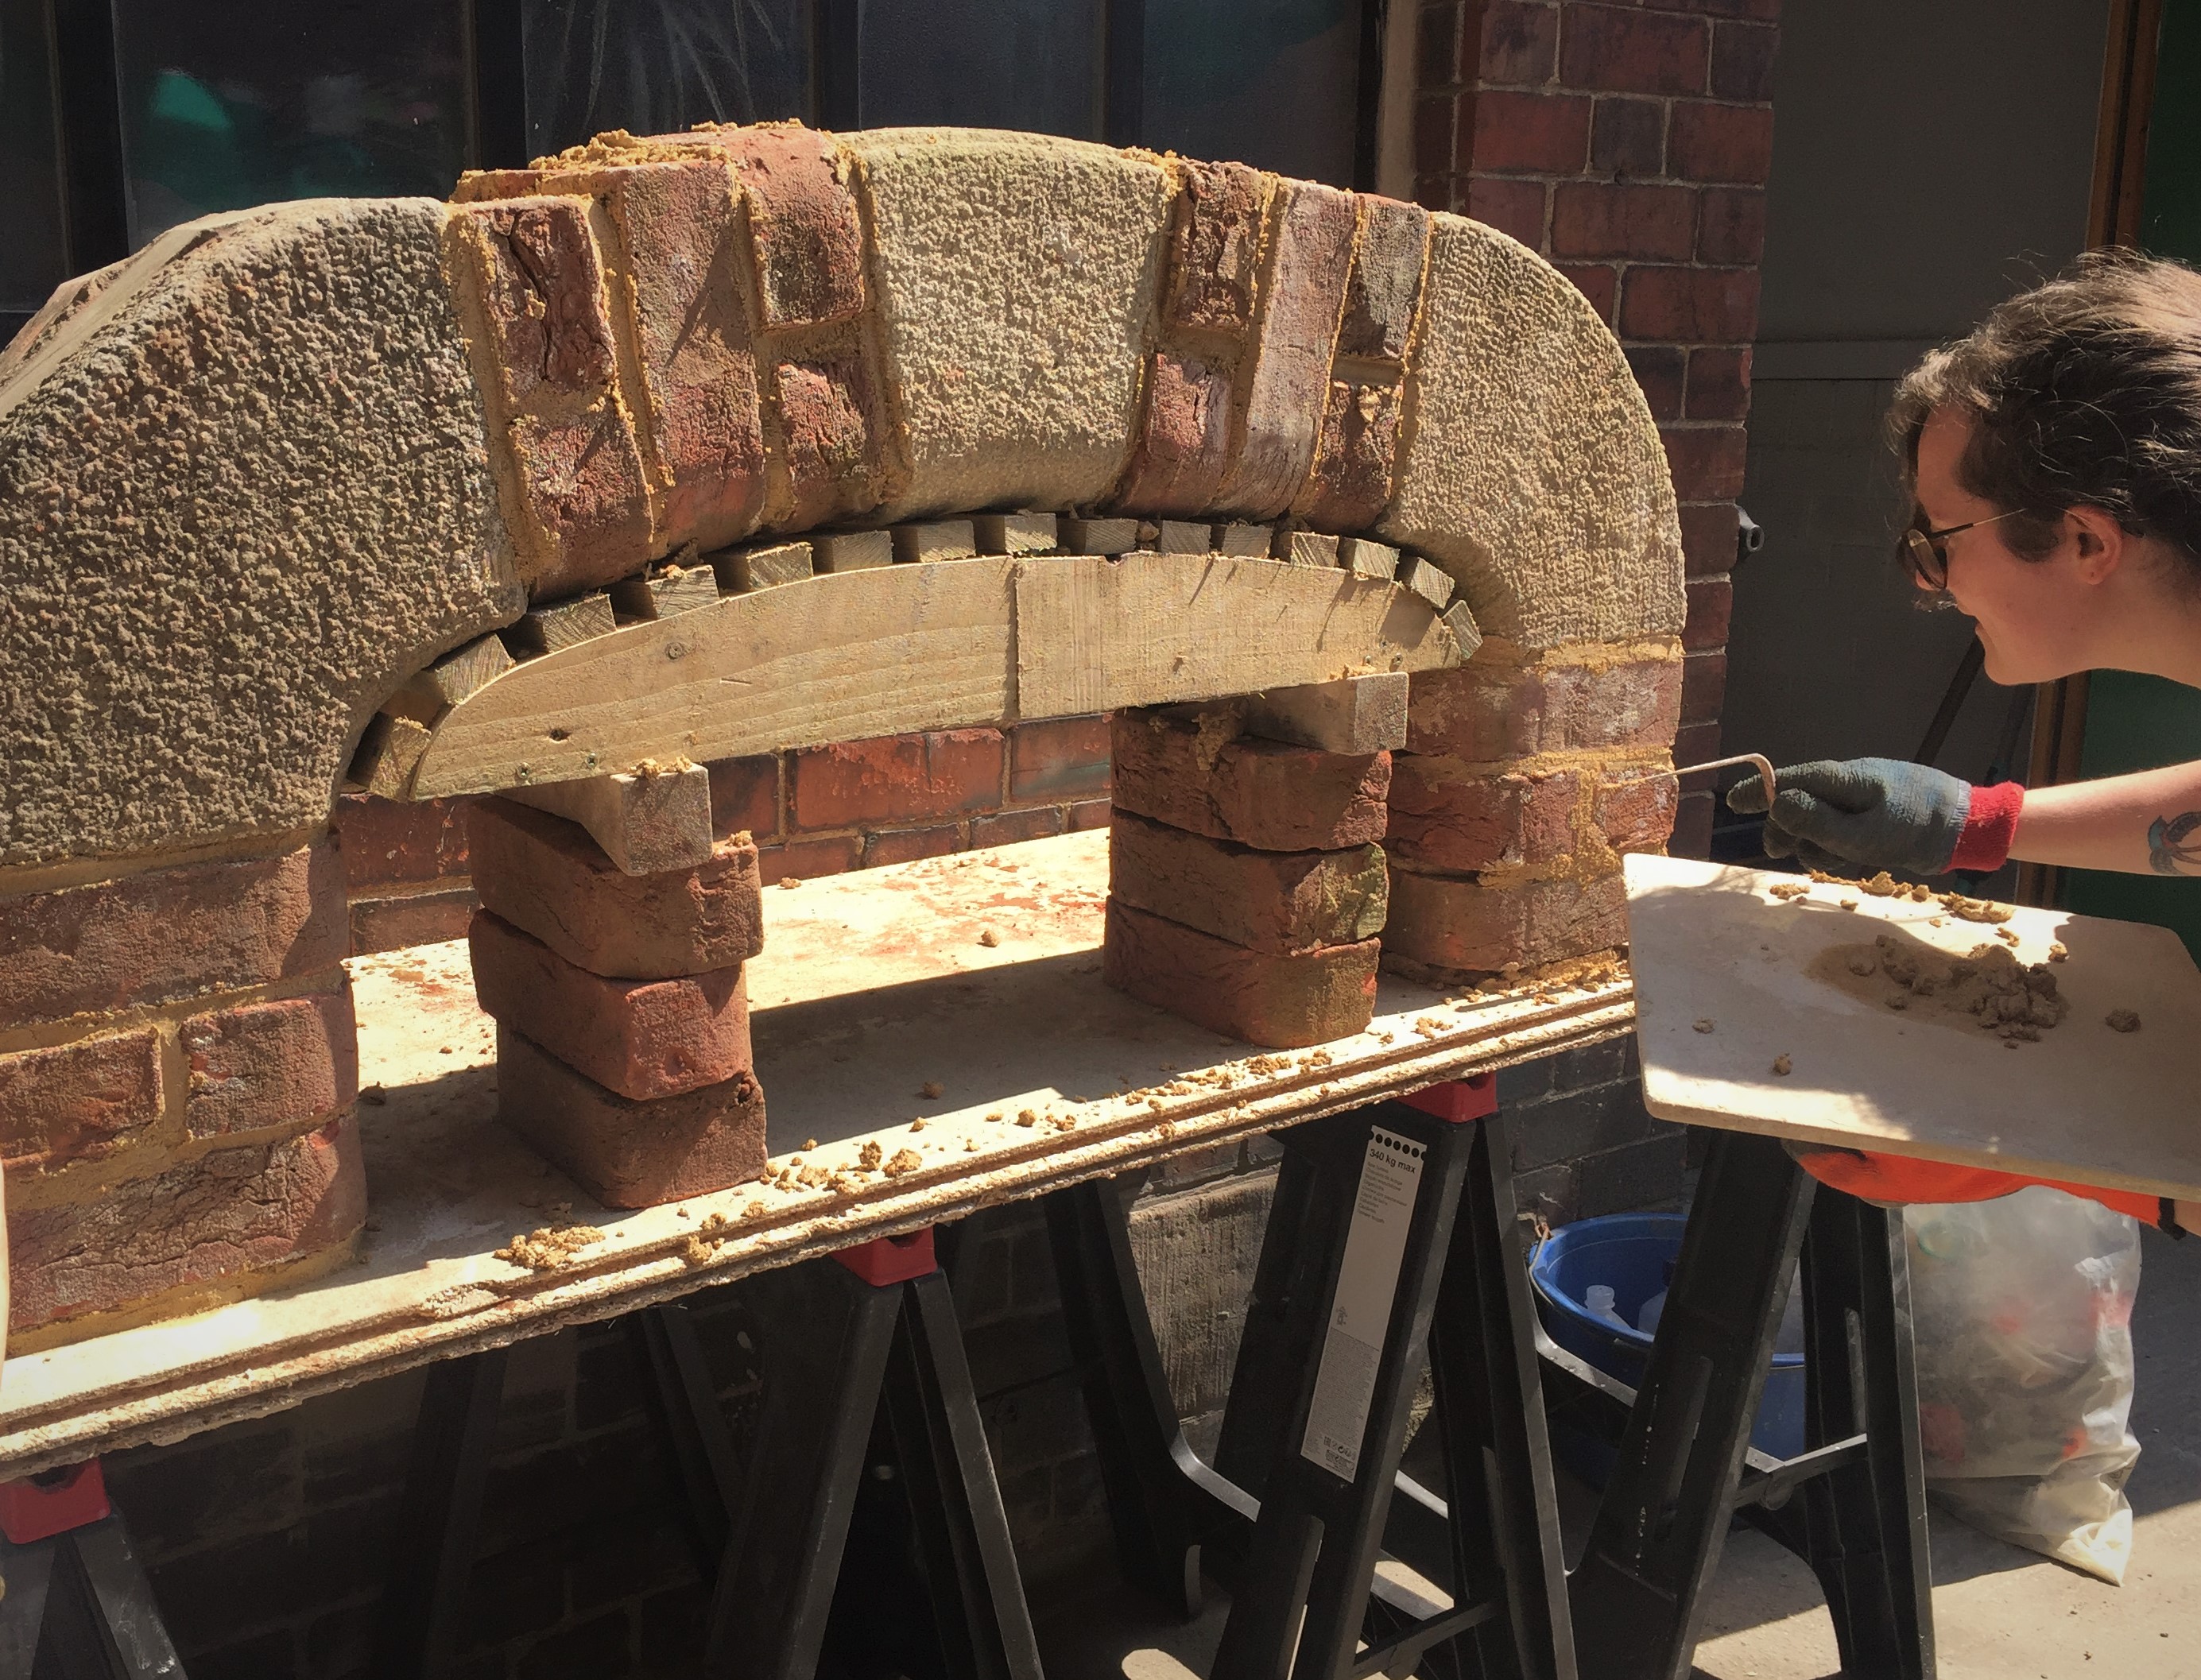 Creating Formwork and Constructing an Arch